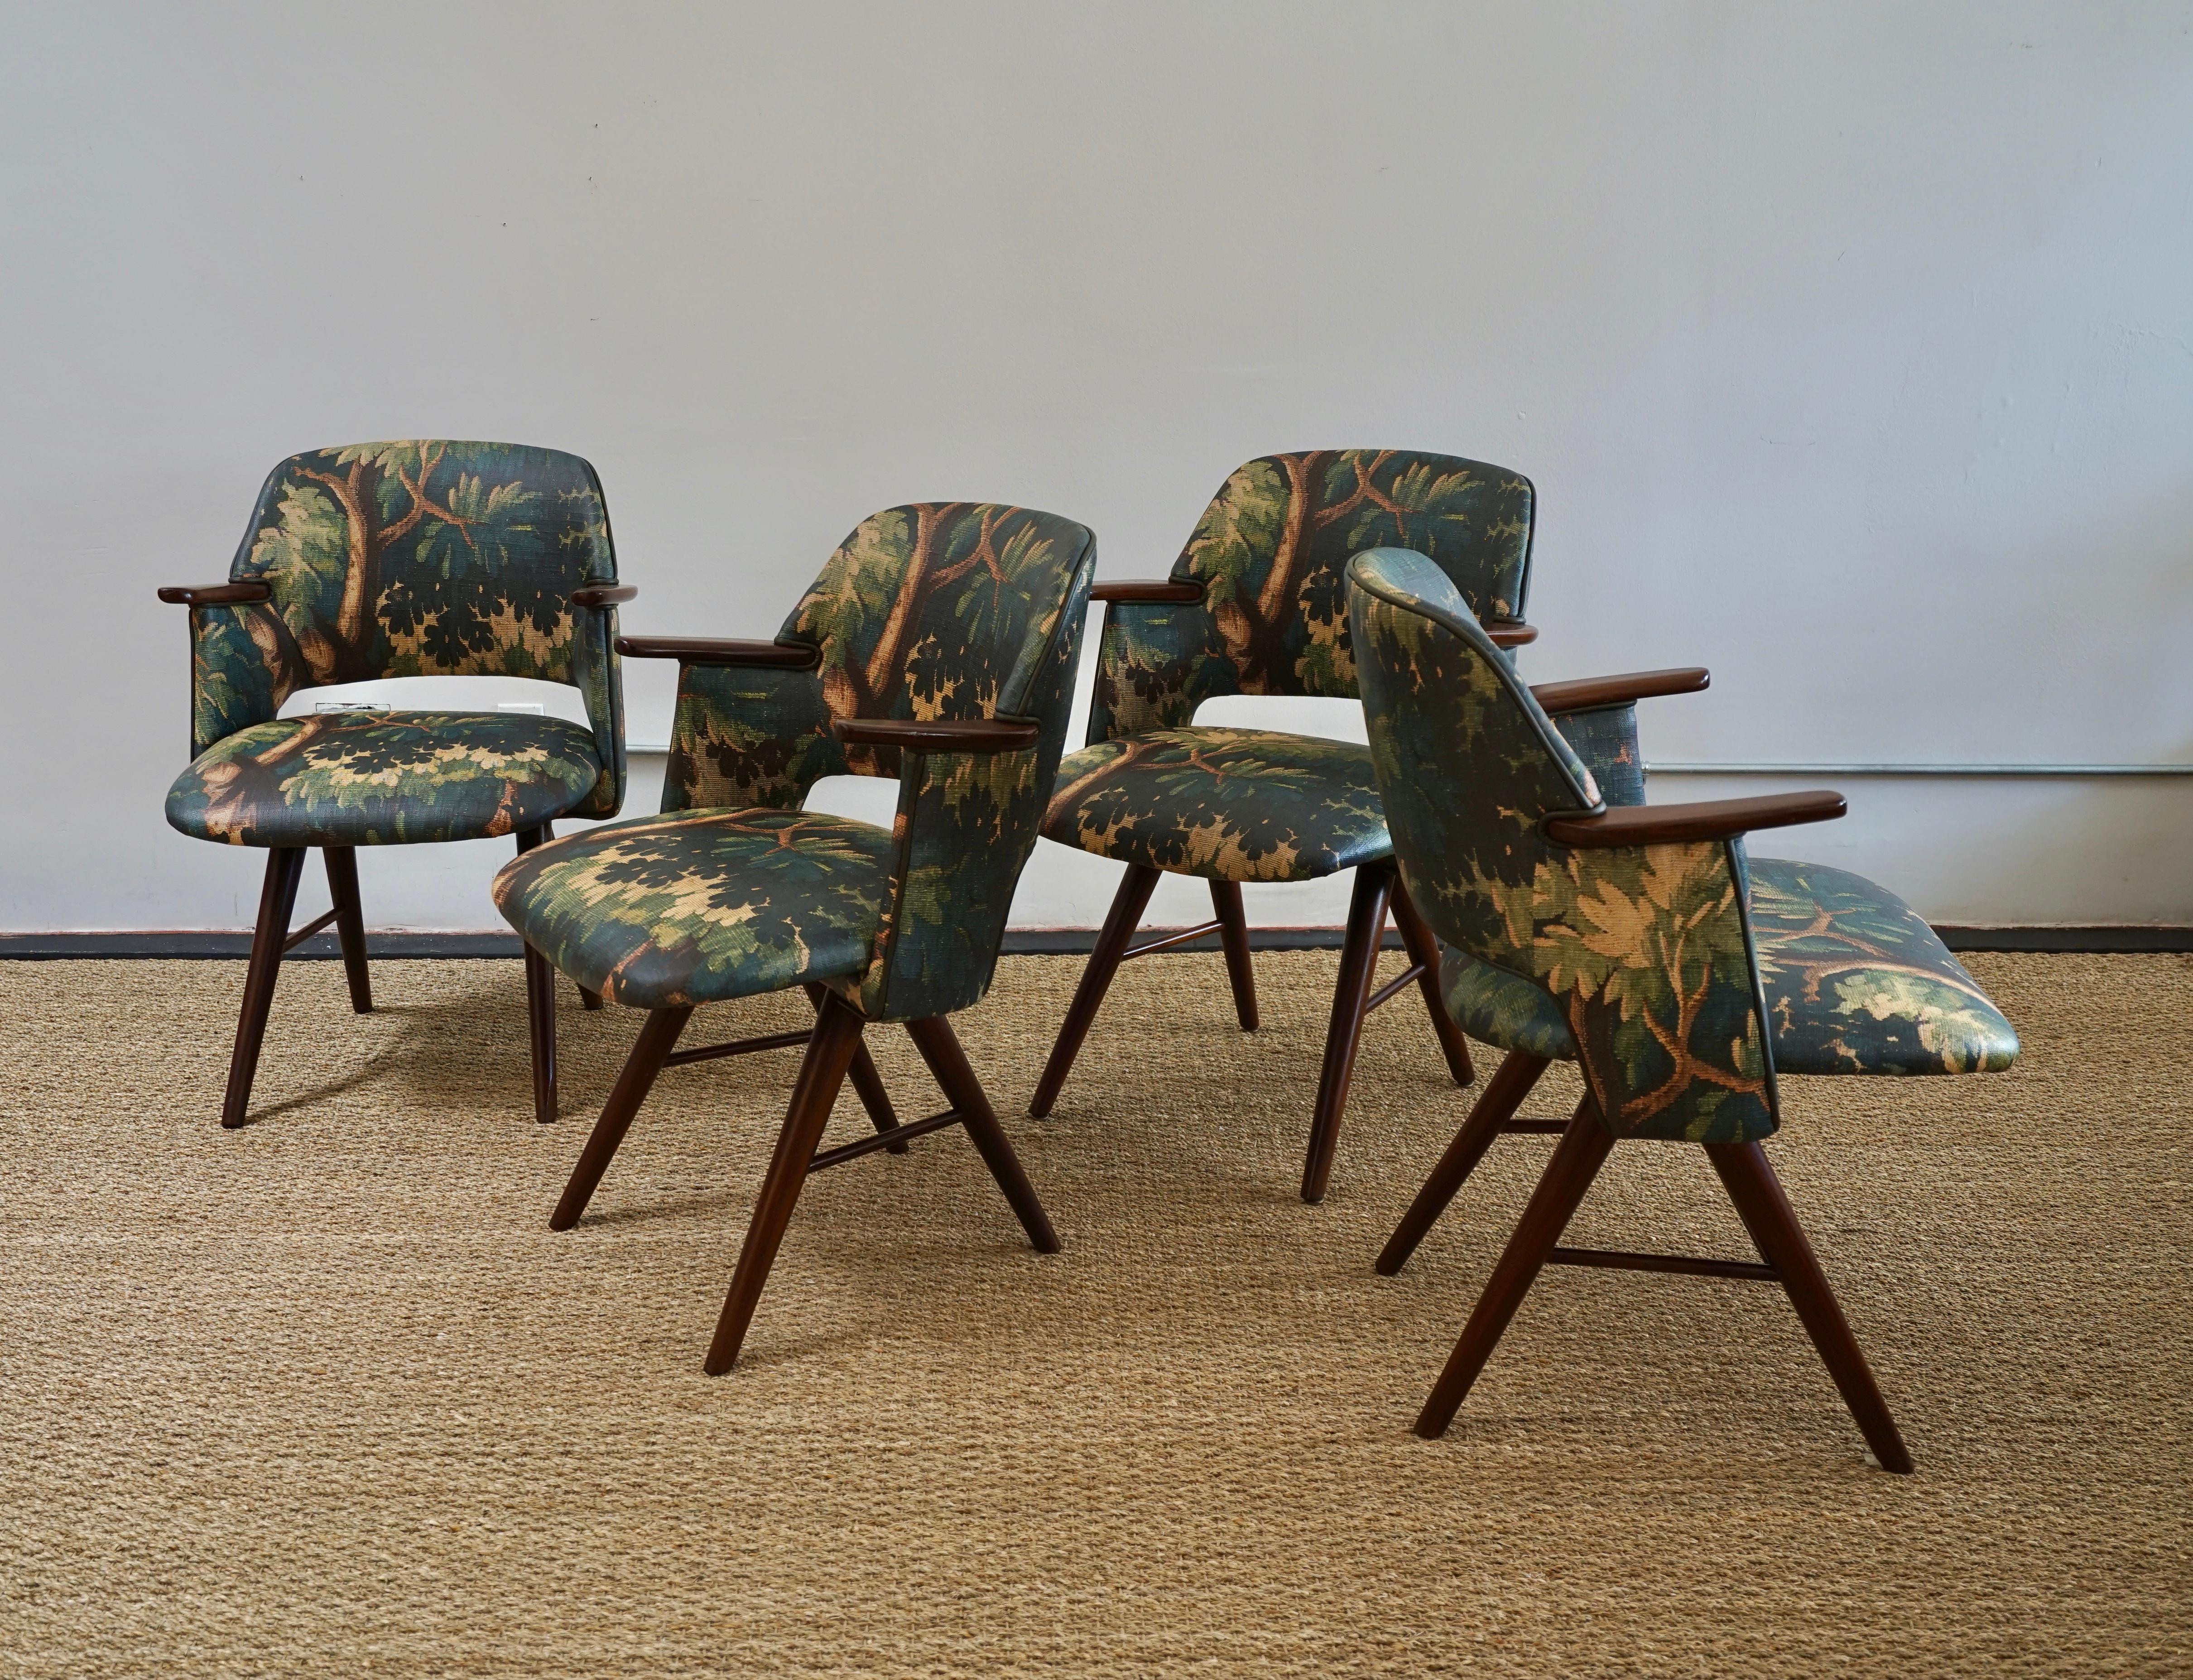 Set of four Cees Braakman Pastoe dining chairs in Dedar limited edition reworked by Martin & Brockett.